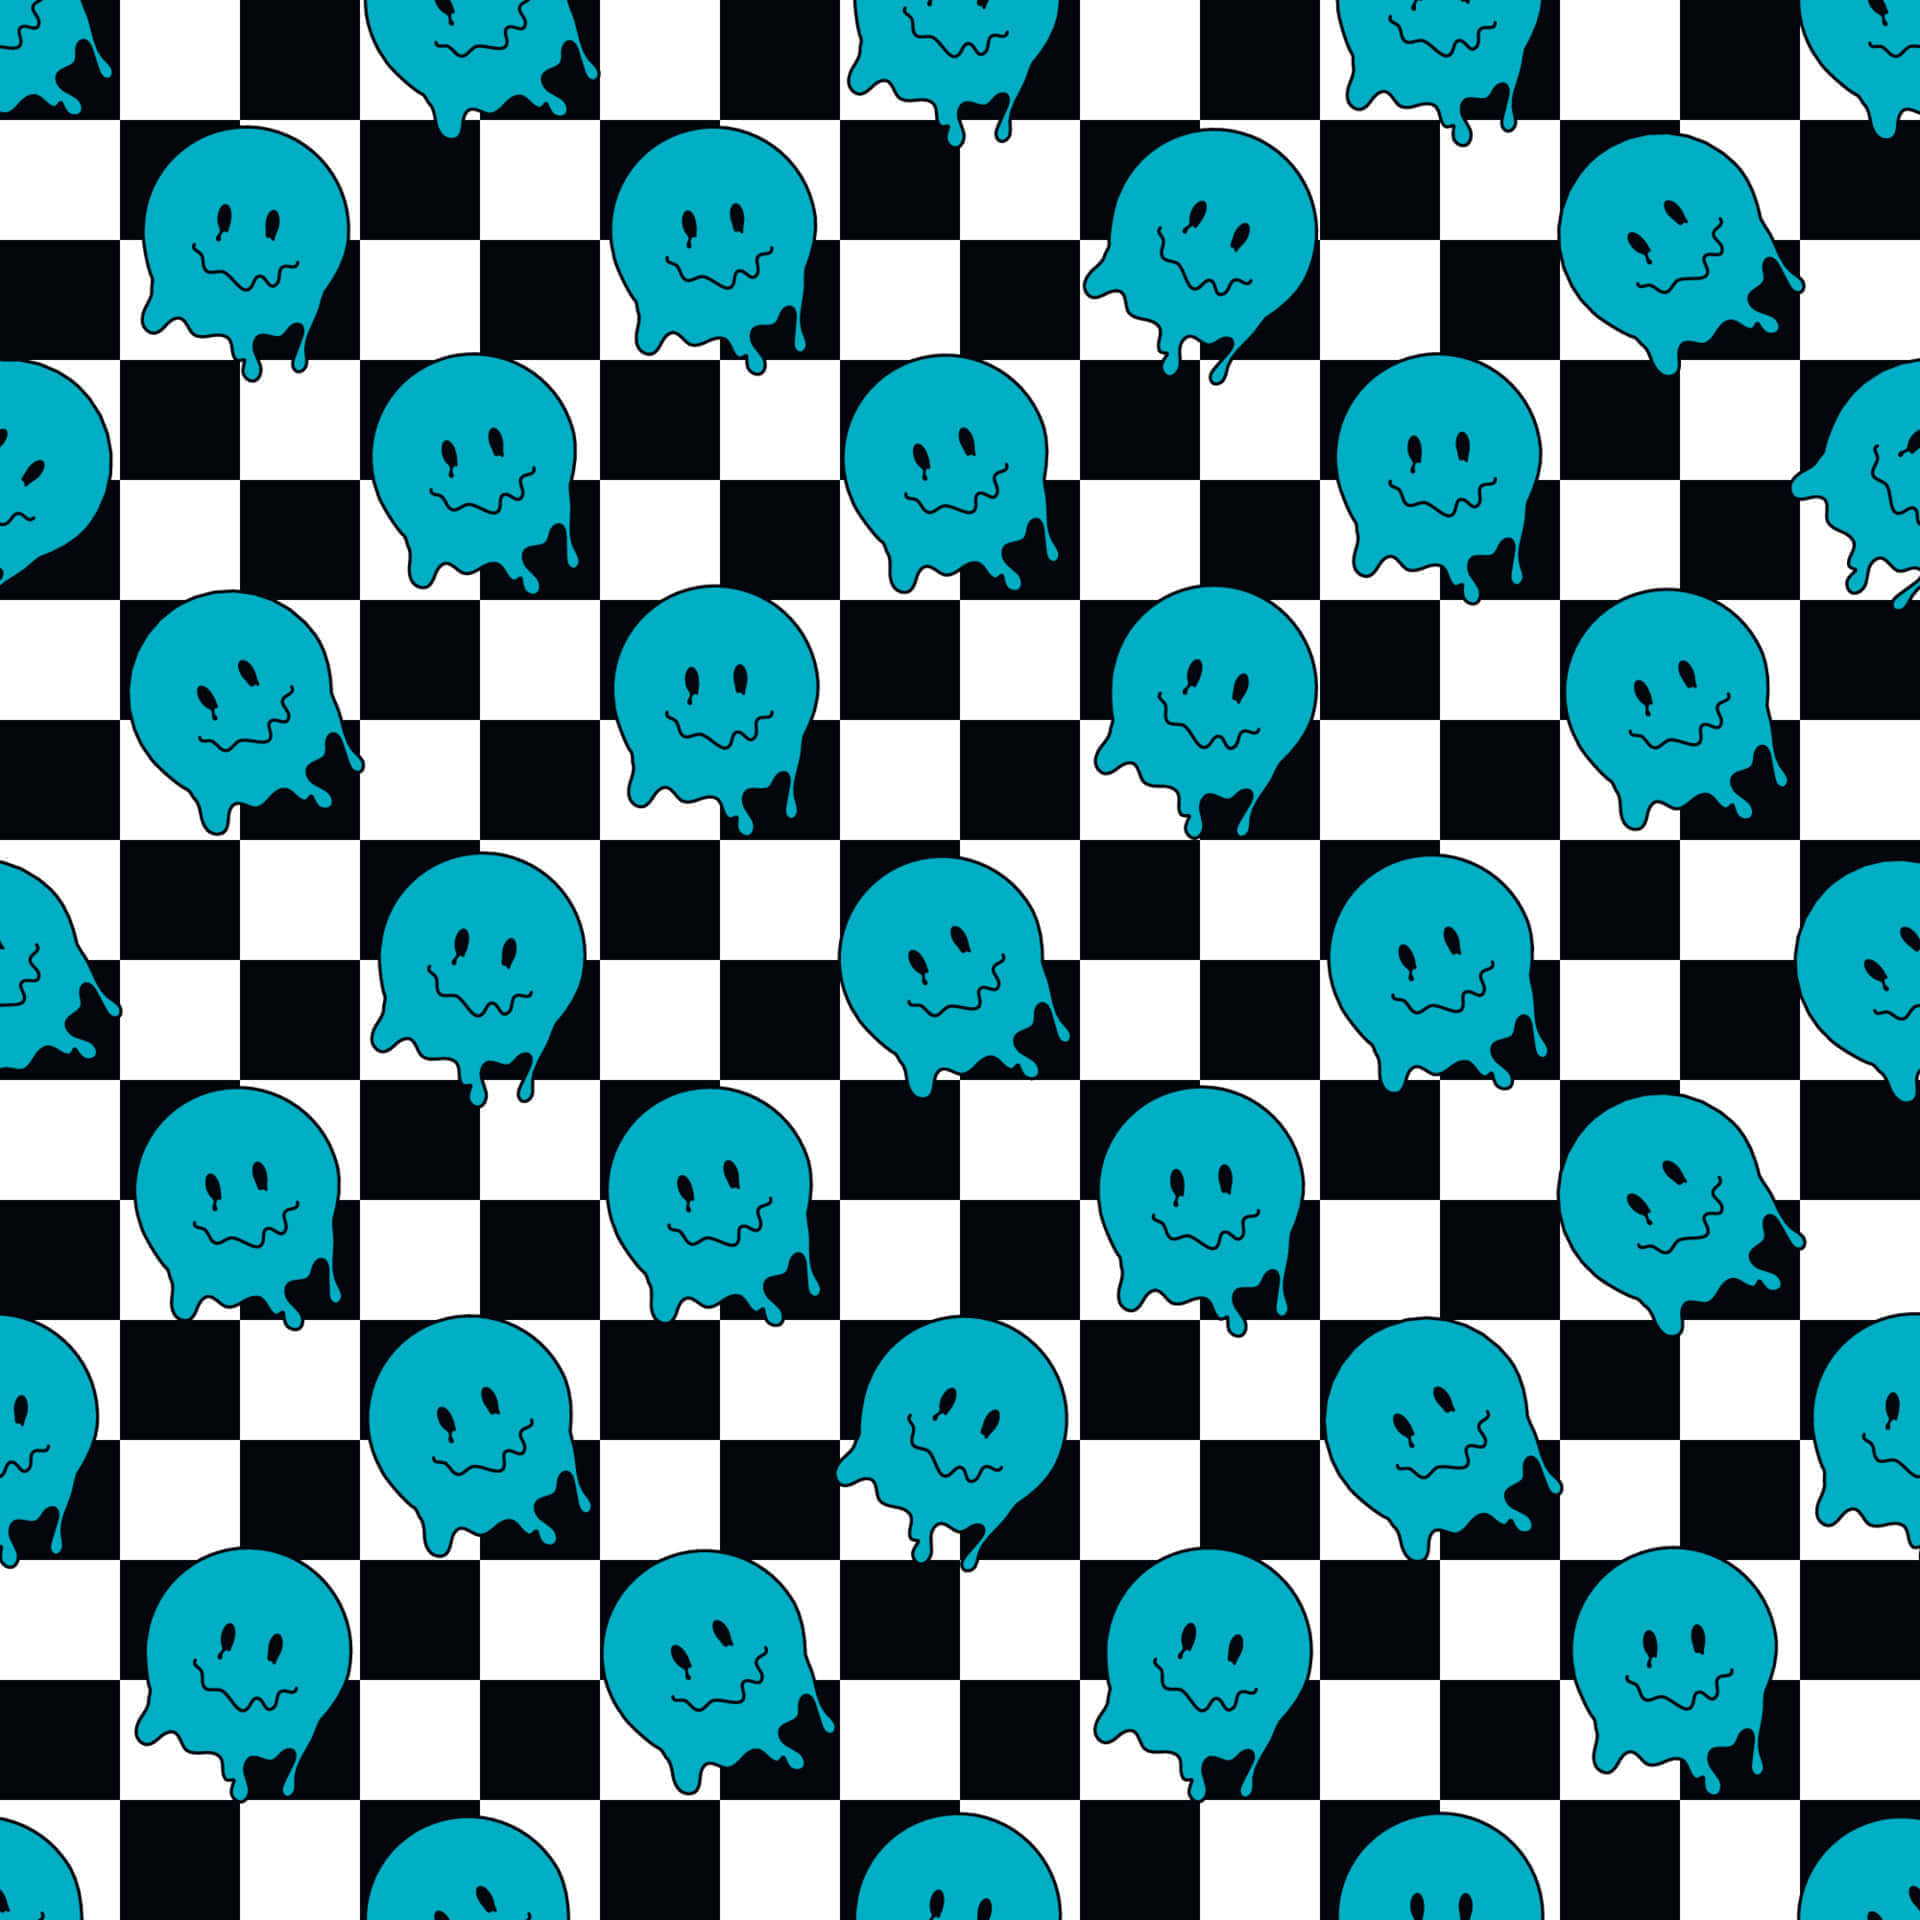 Blue Smiley Ghost Pattern Checkered Background Wallpaper